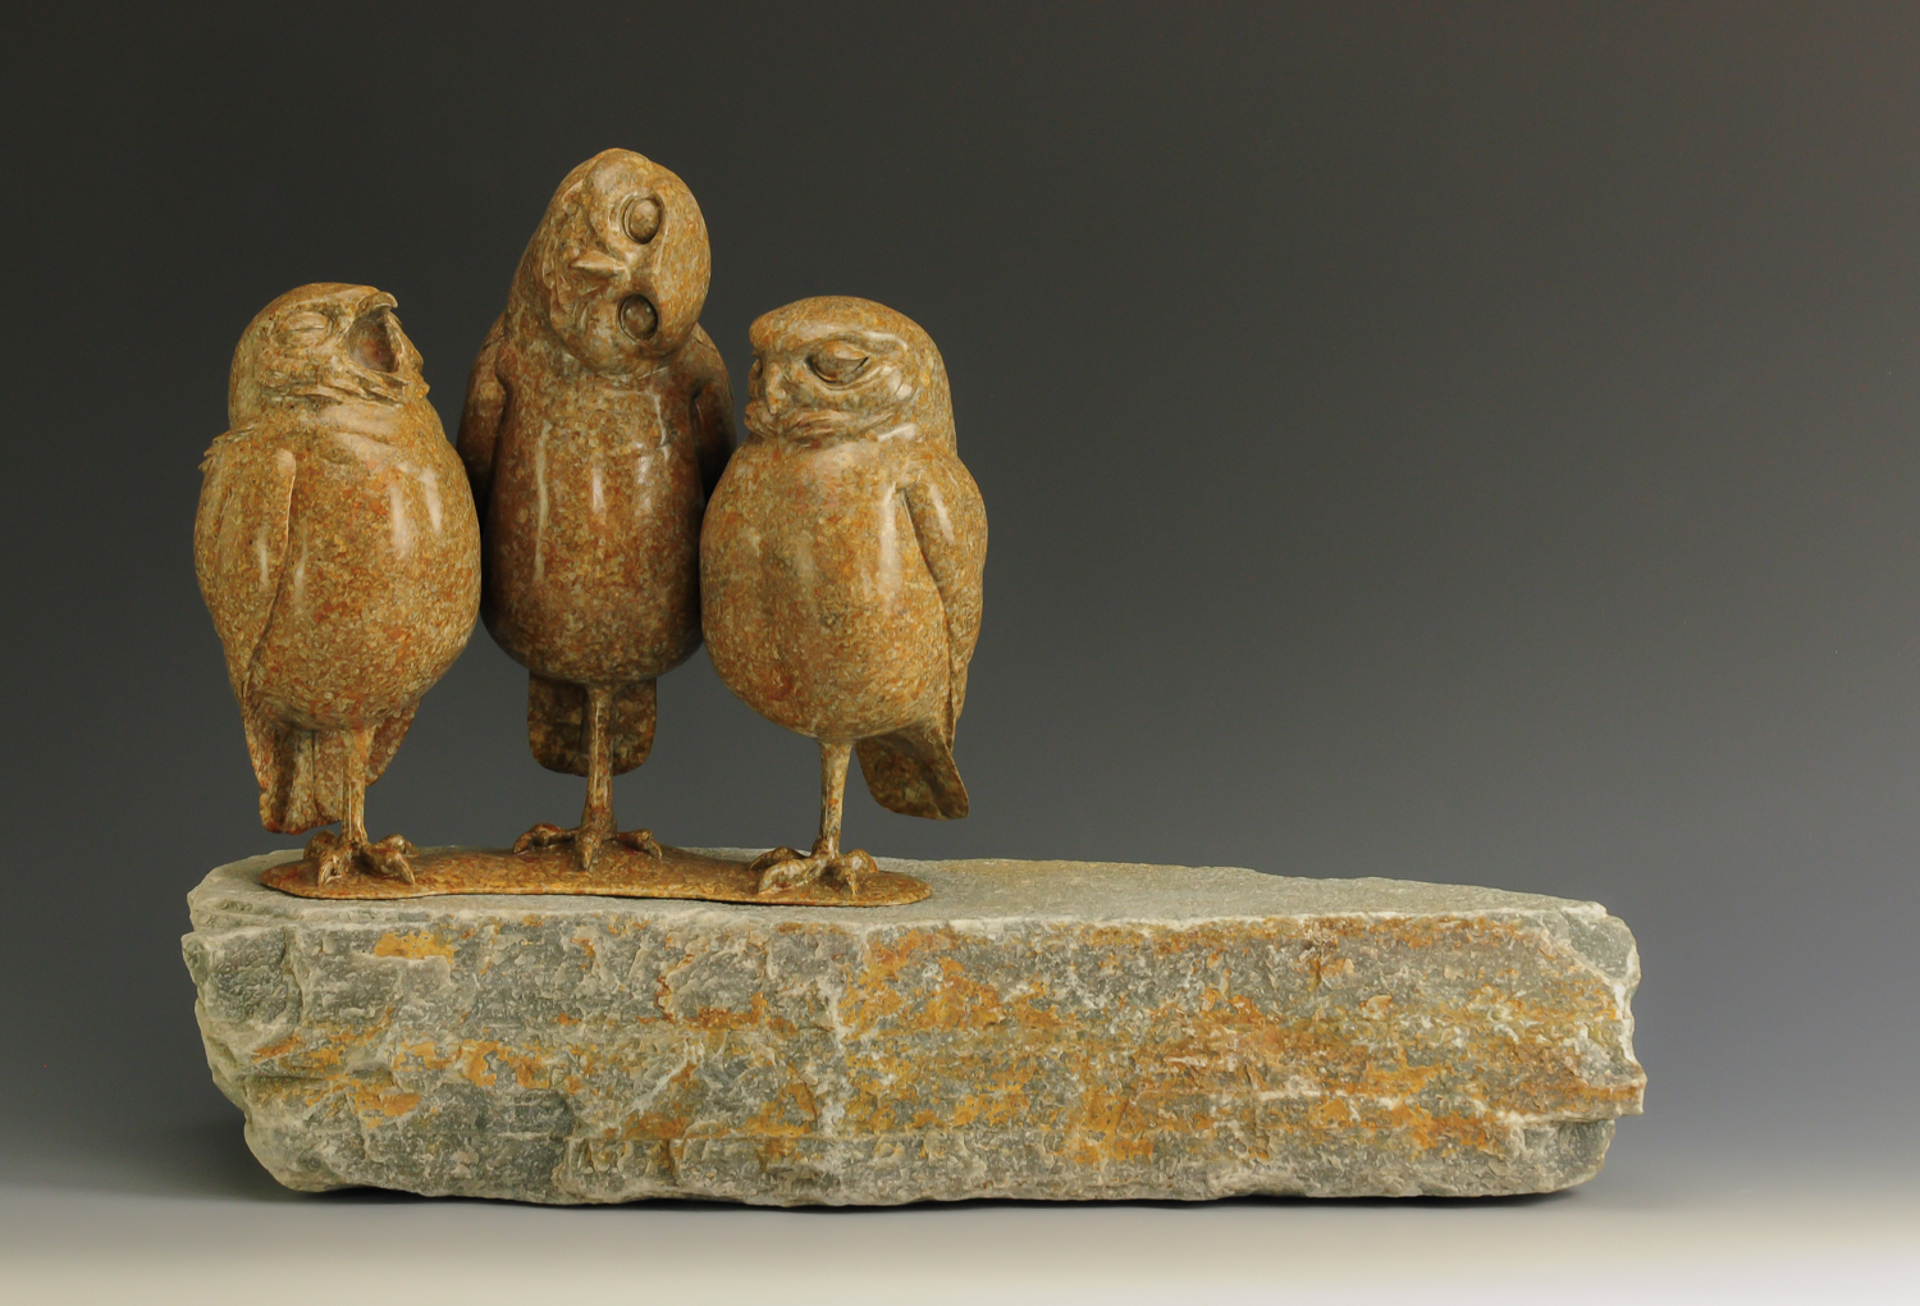 A Fine Art Sculpture In Bronze By Jeremy Bradshaw Featuring A Trio of Owls, Available At Gallery Wild